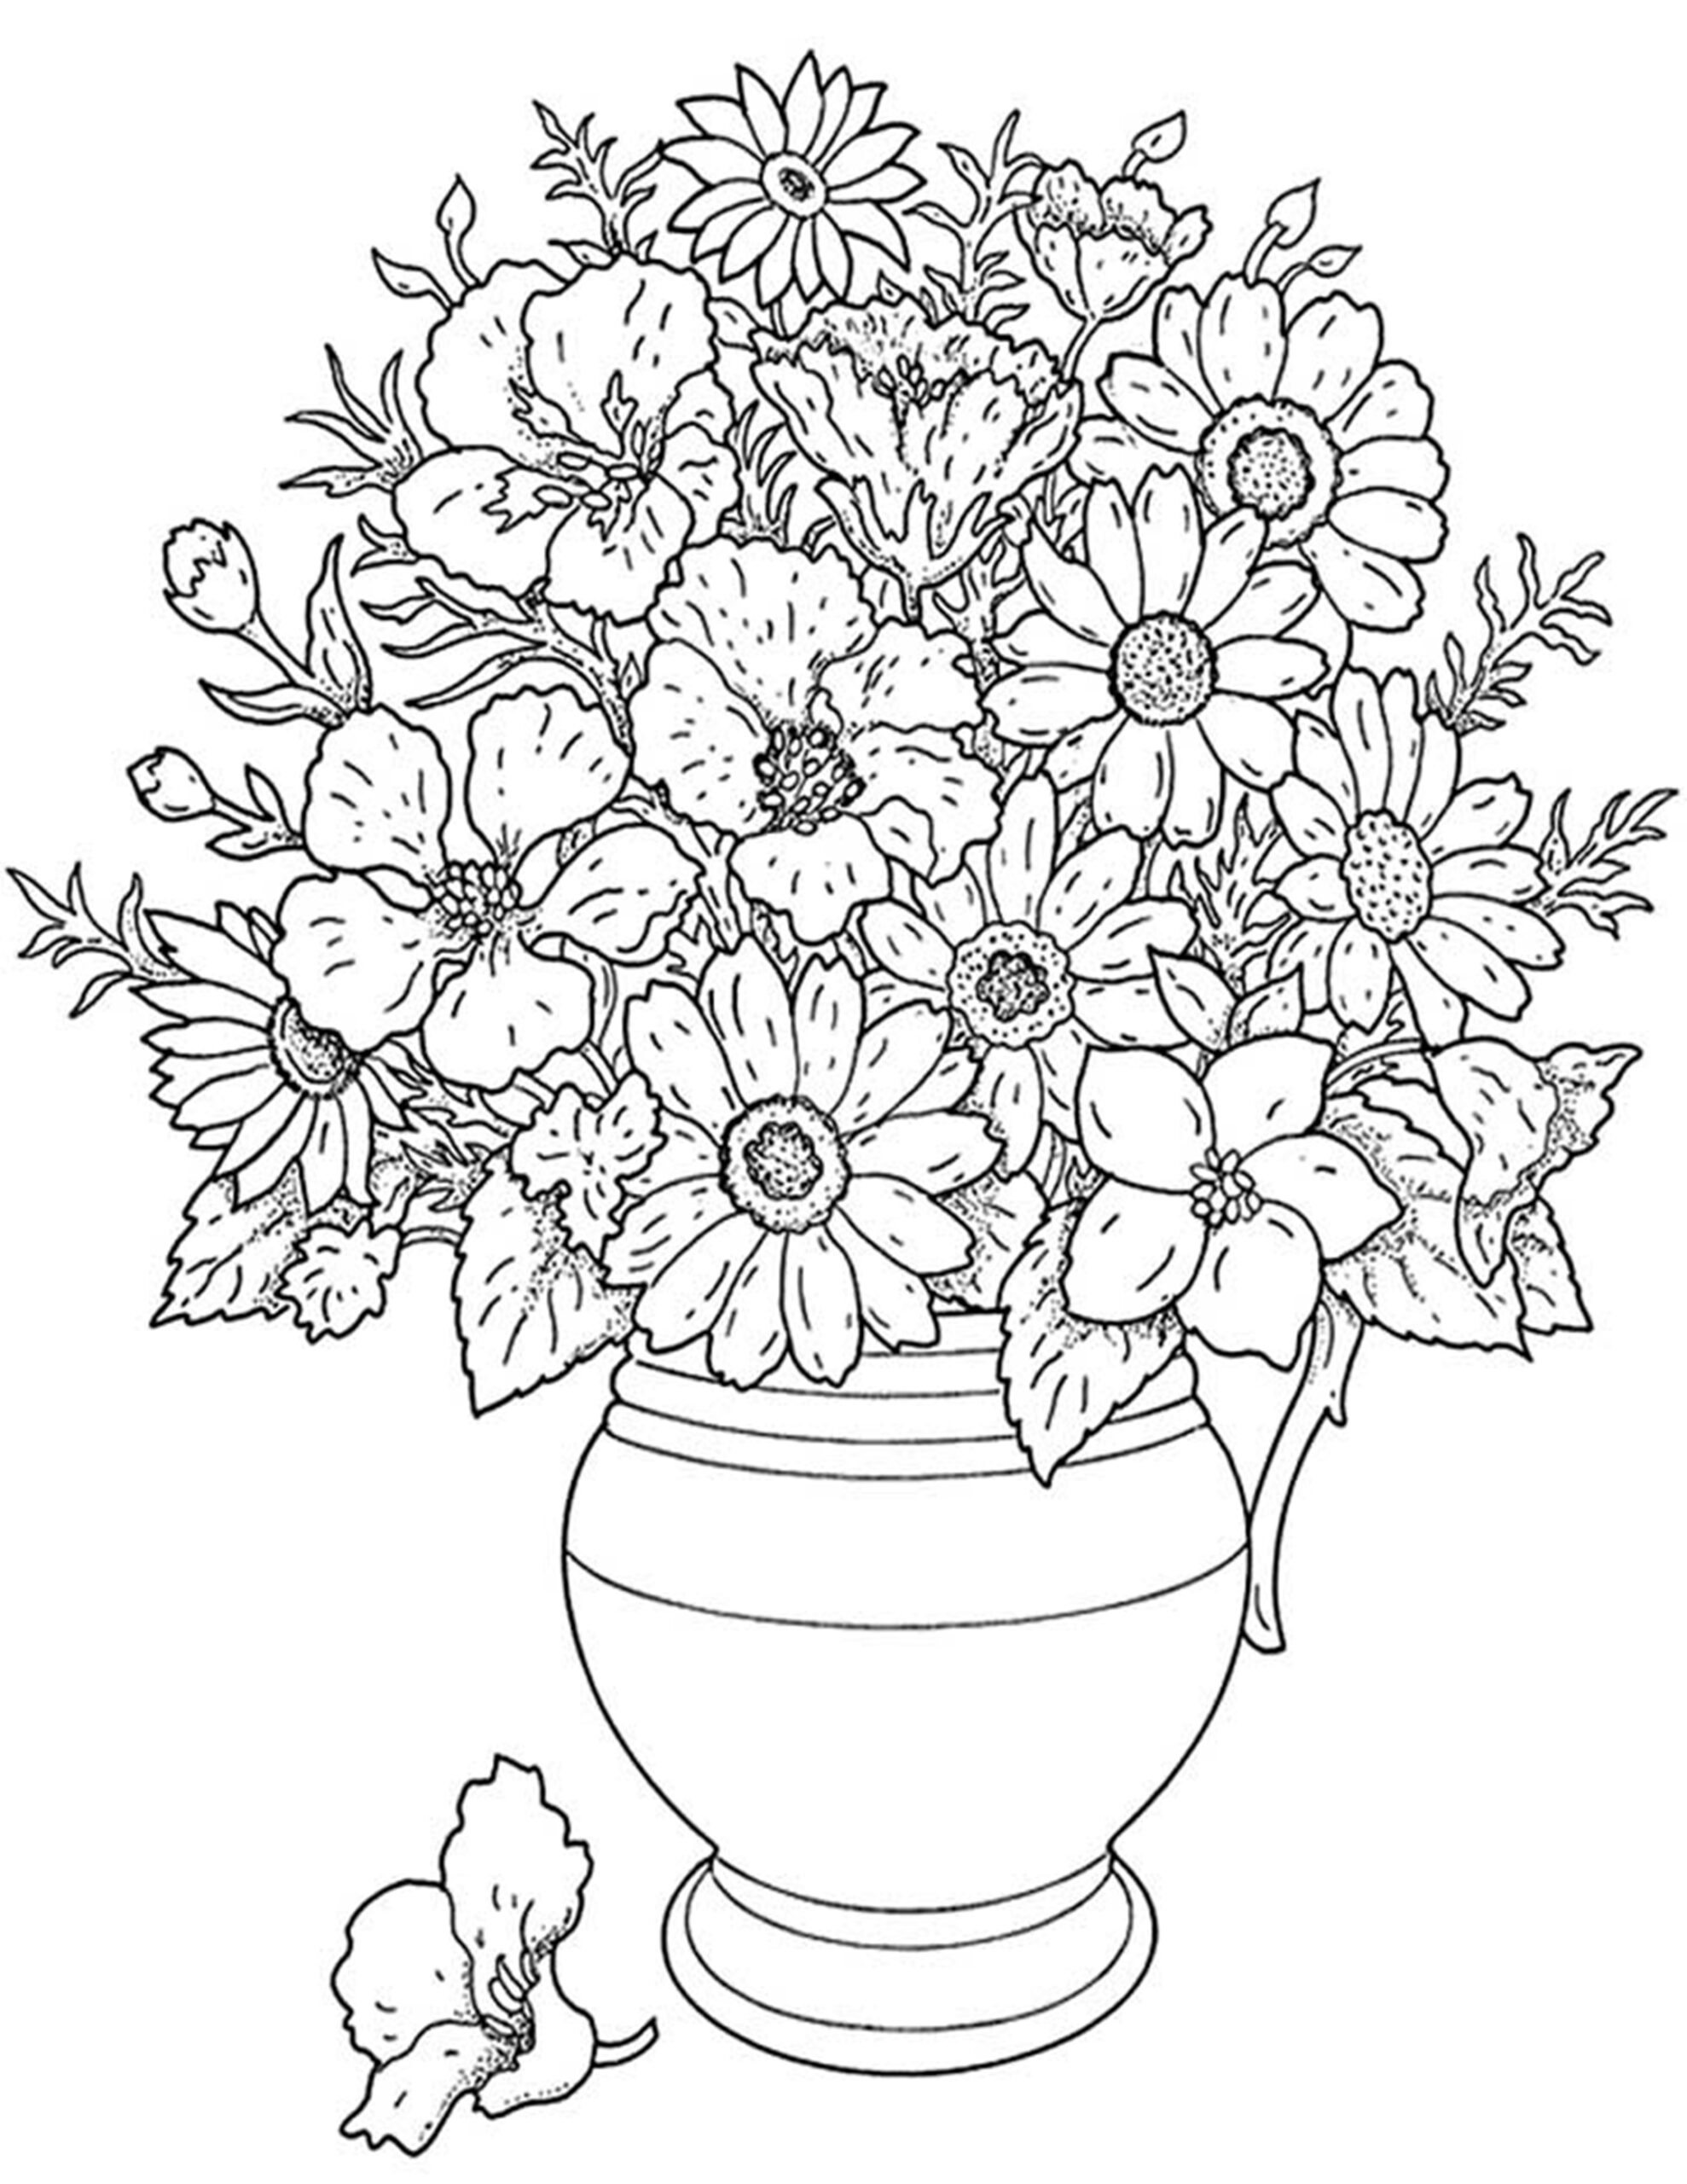 Printable Pictures Of Flowers For Free